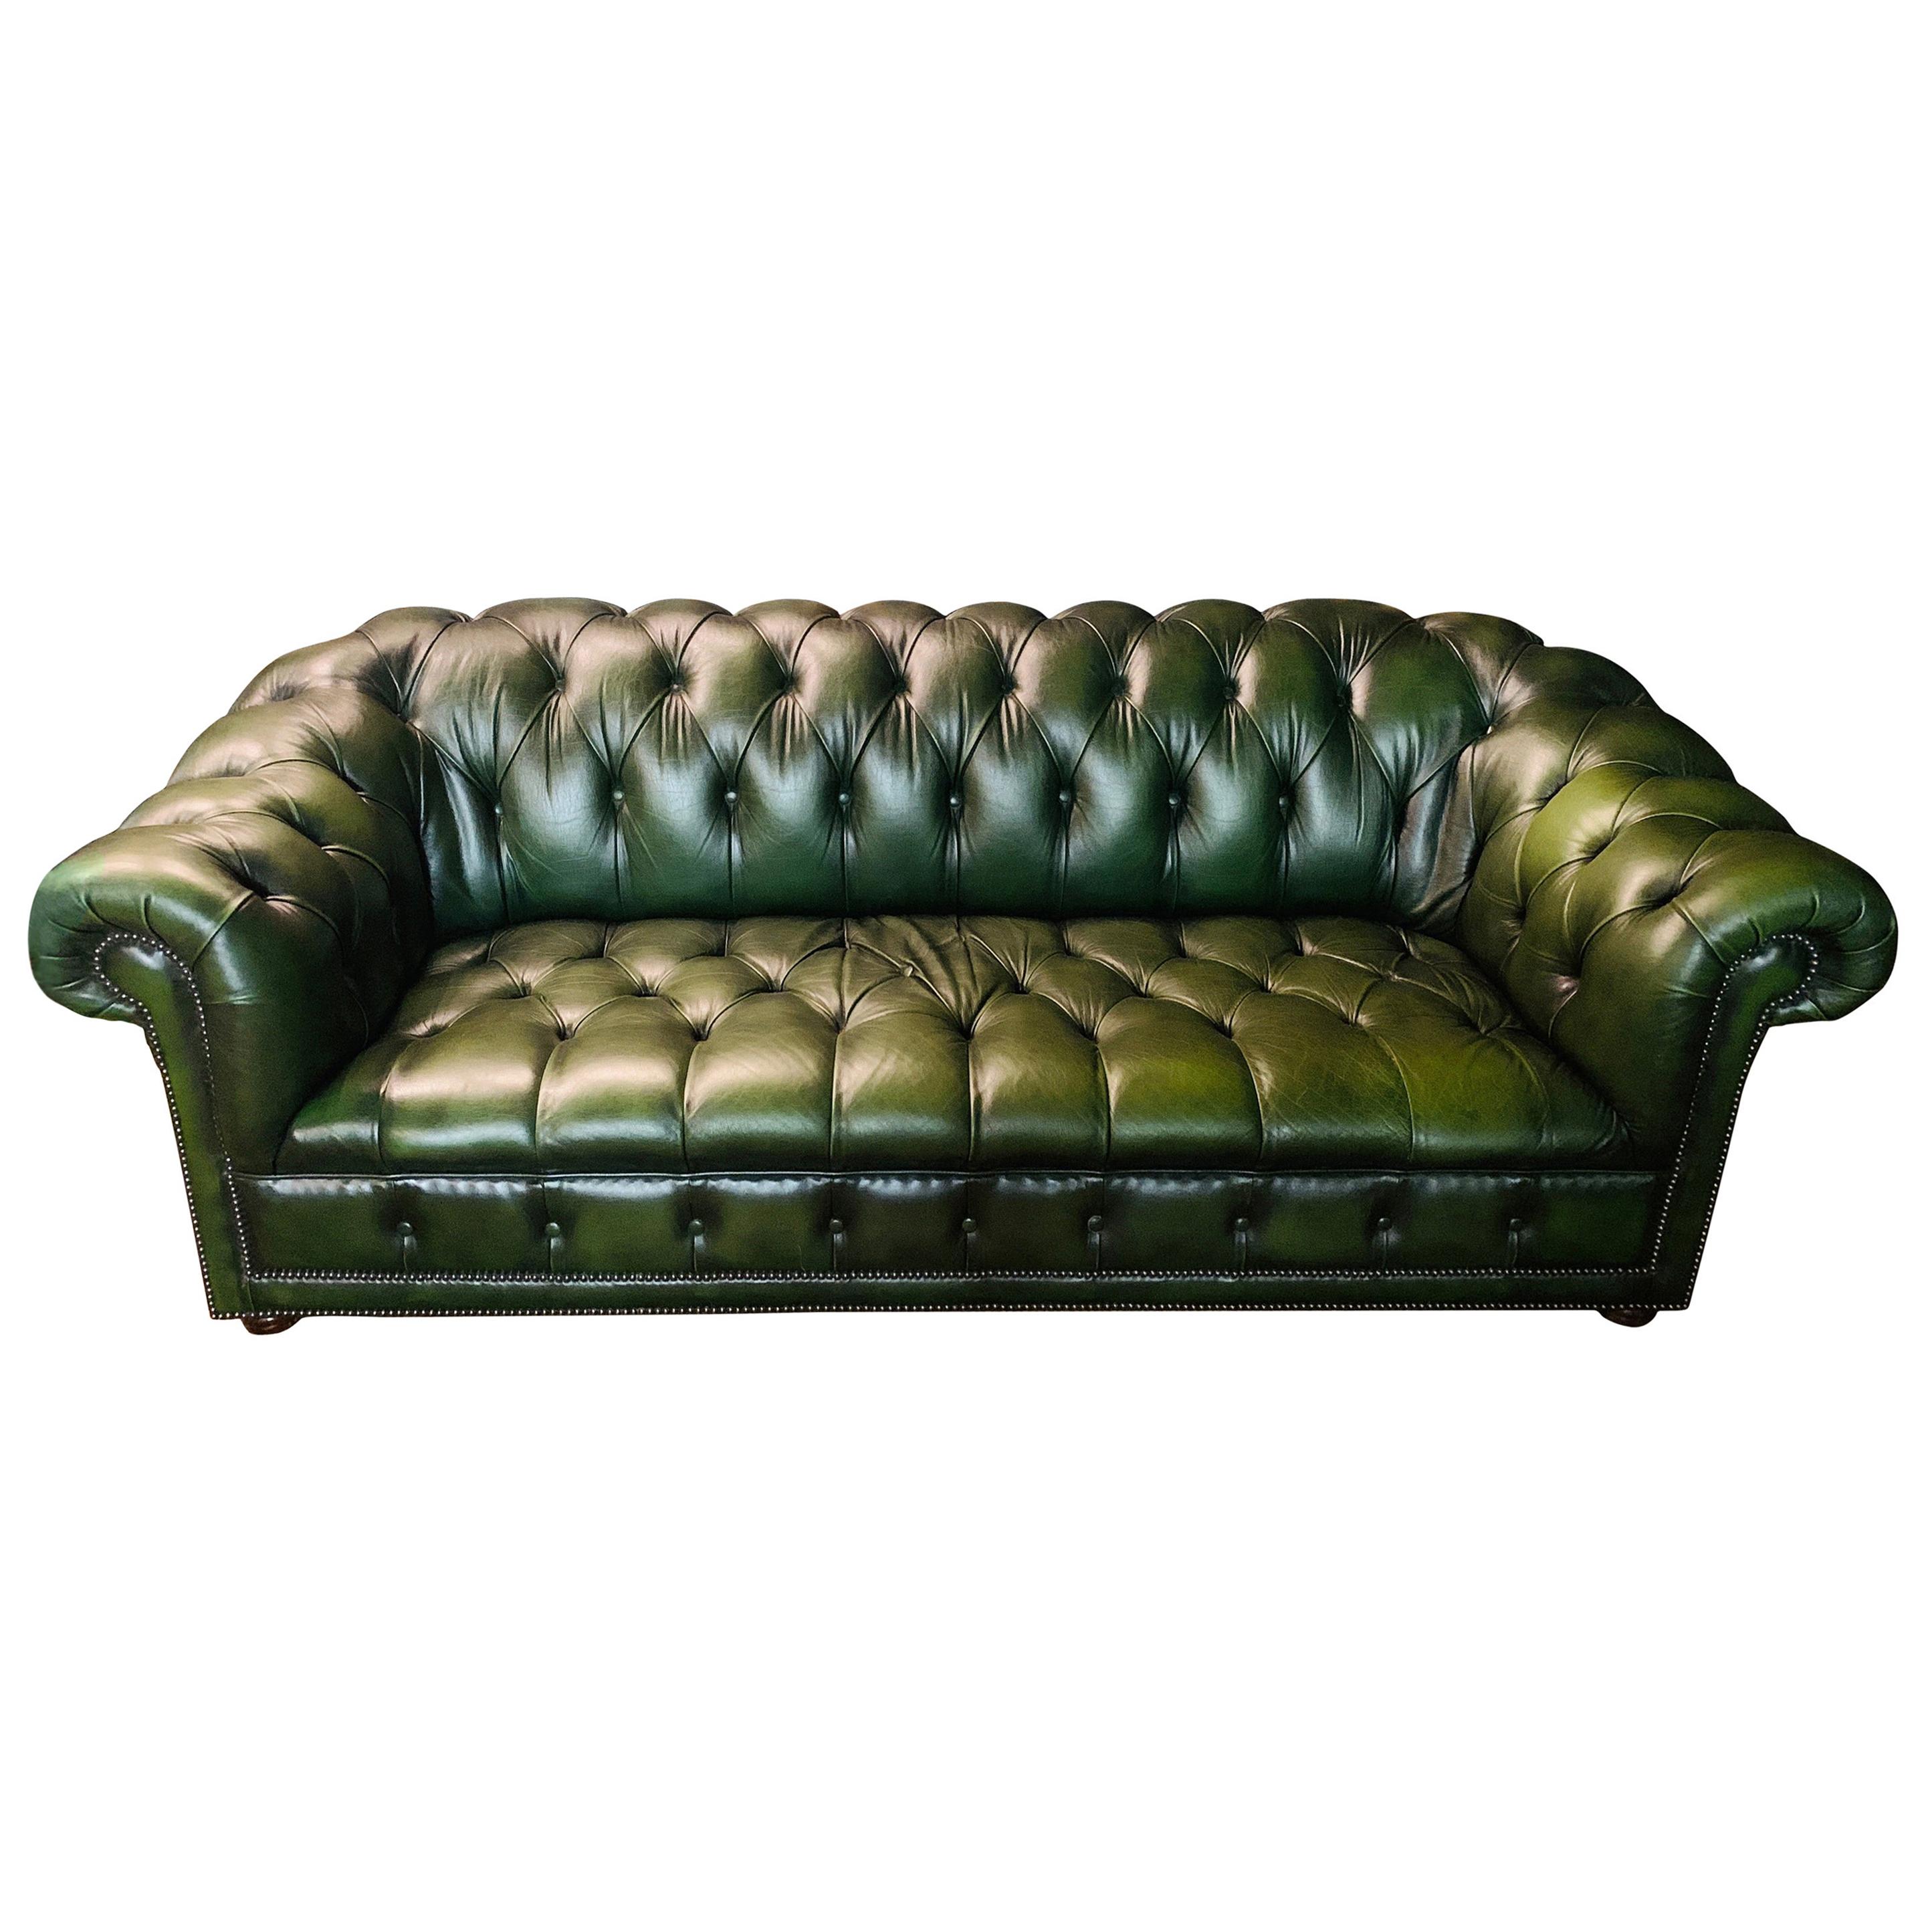 Original Green Chesterfield Sofa from the 80's